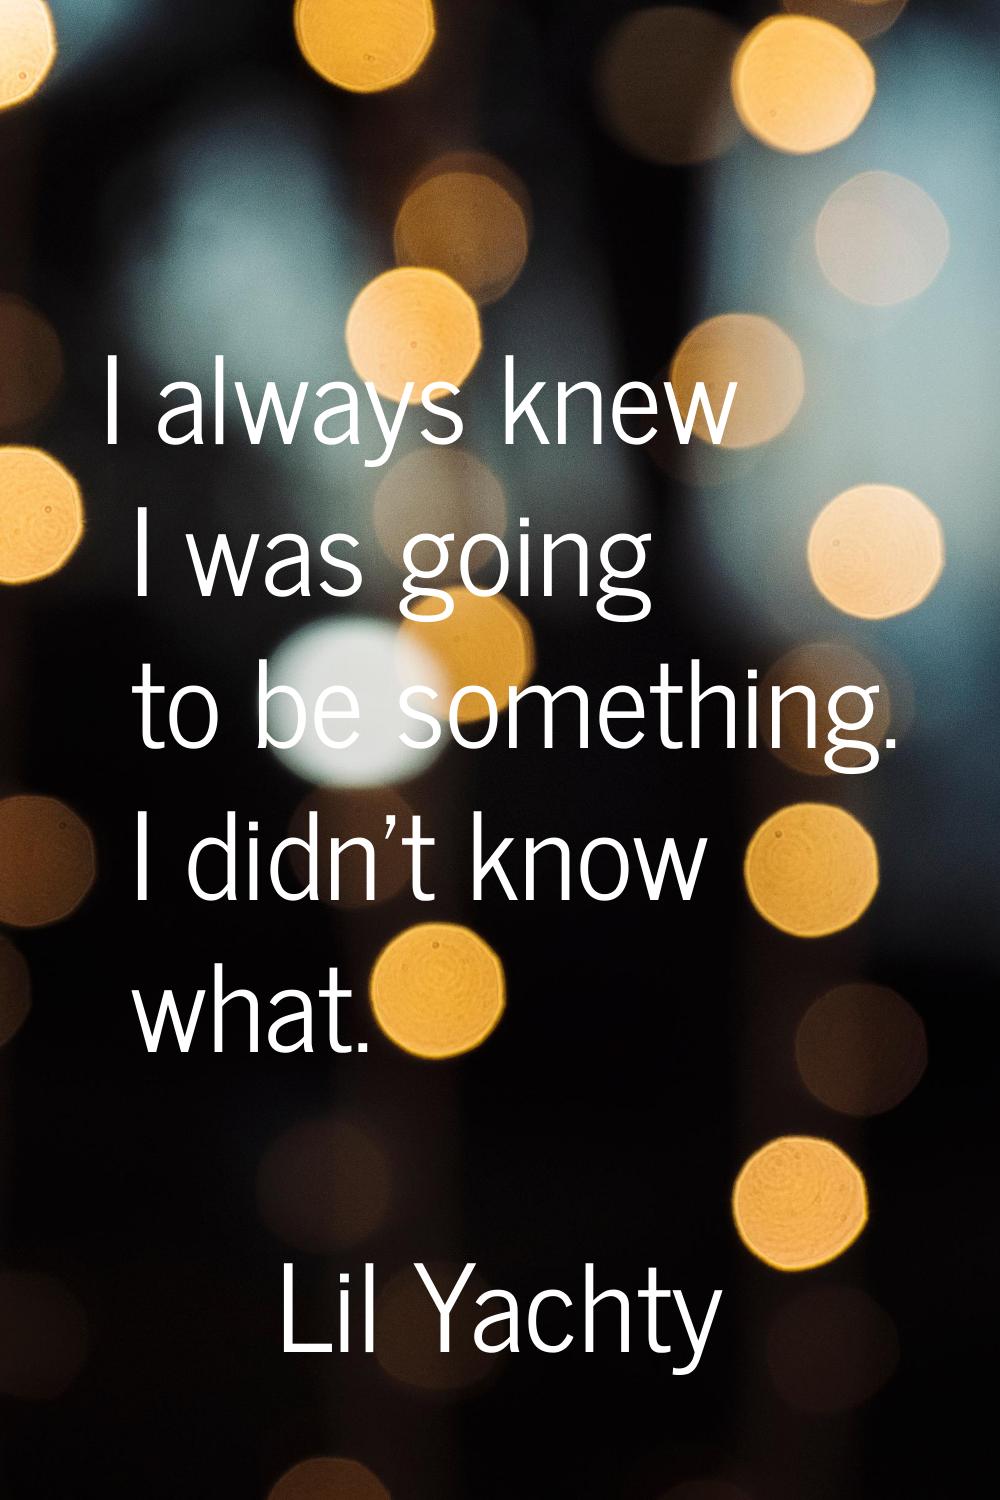 I always knew I was going to be something. I didn't know what.